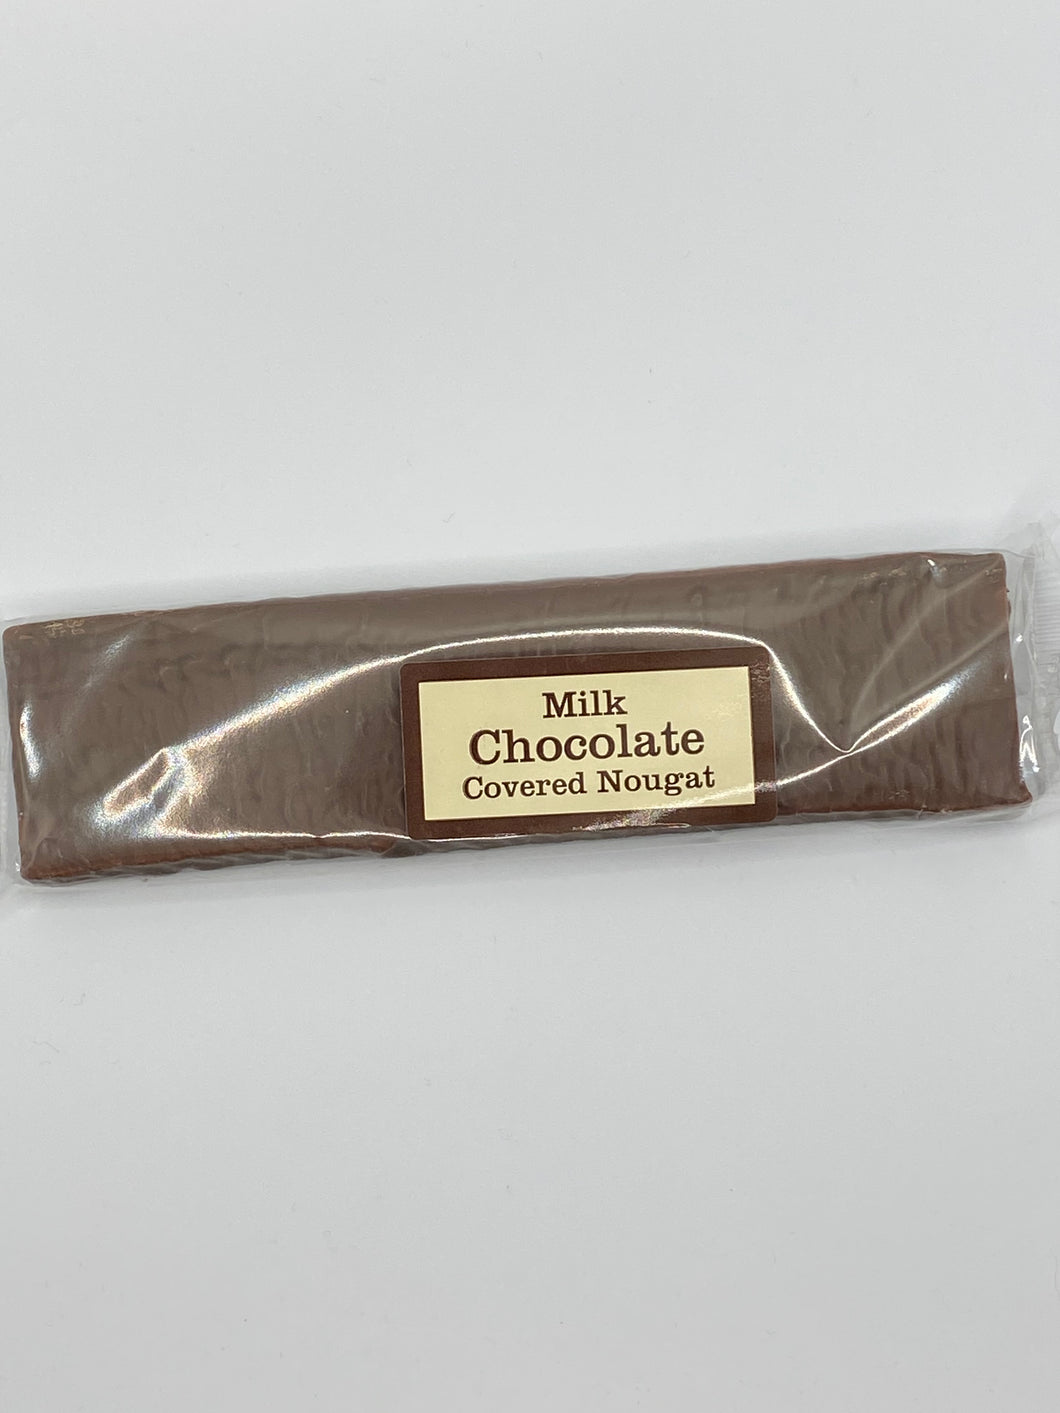 Bar of milk chocolate covered nougat